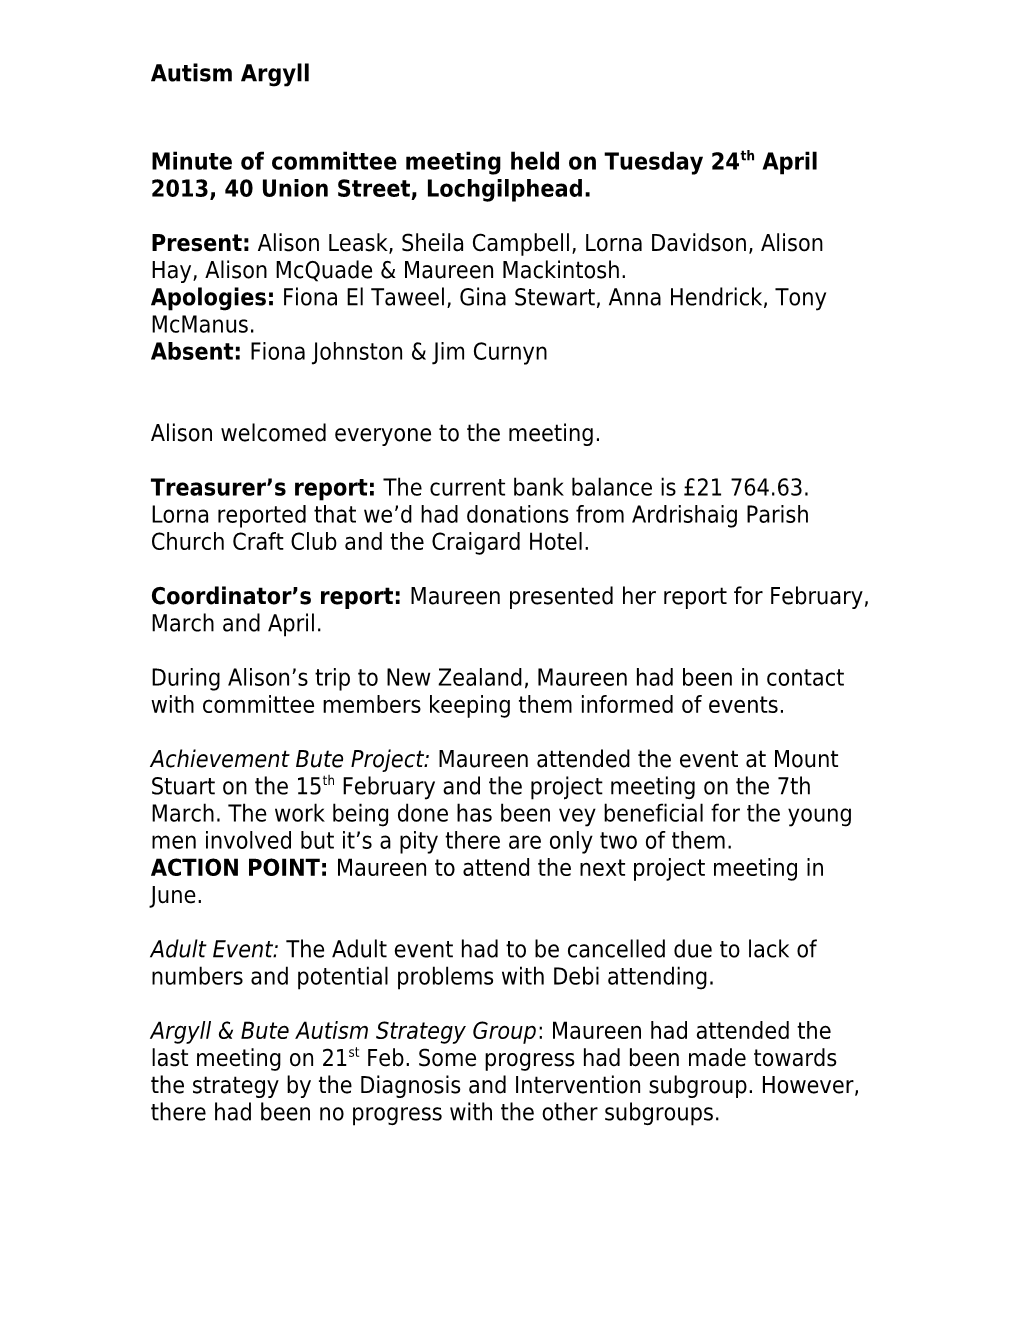 Minute of Committee Meeting Held on Tuesday 24Th April 2013, 40 Union Street, Lochgilphead